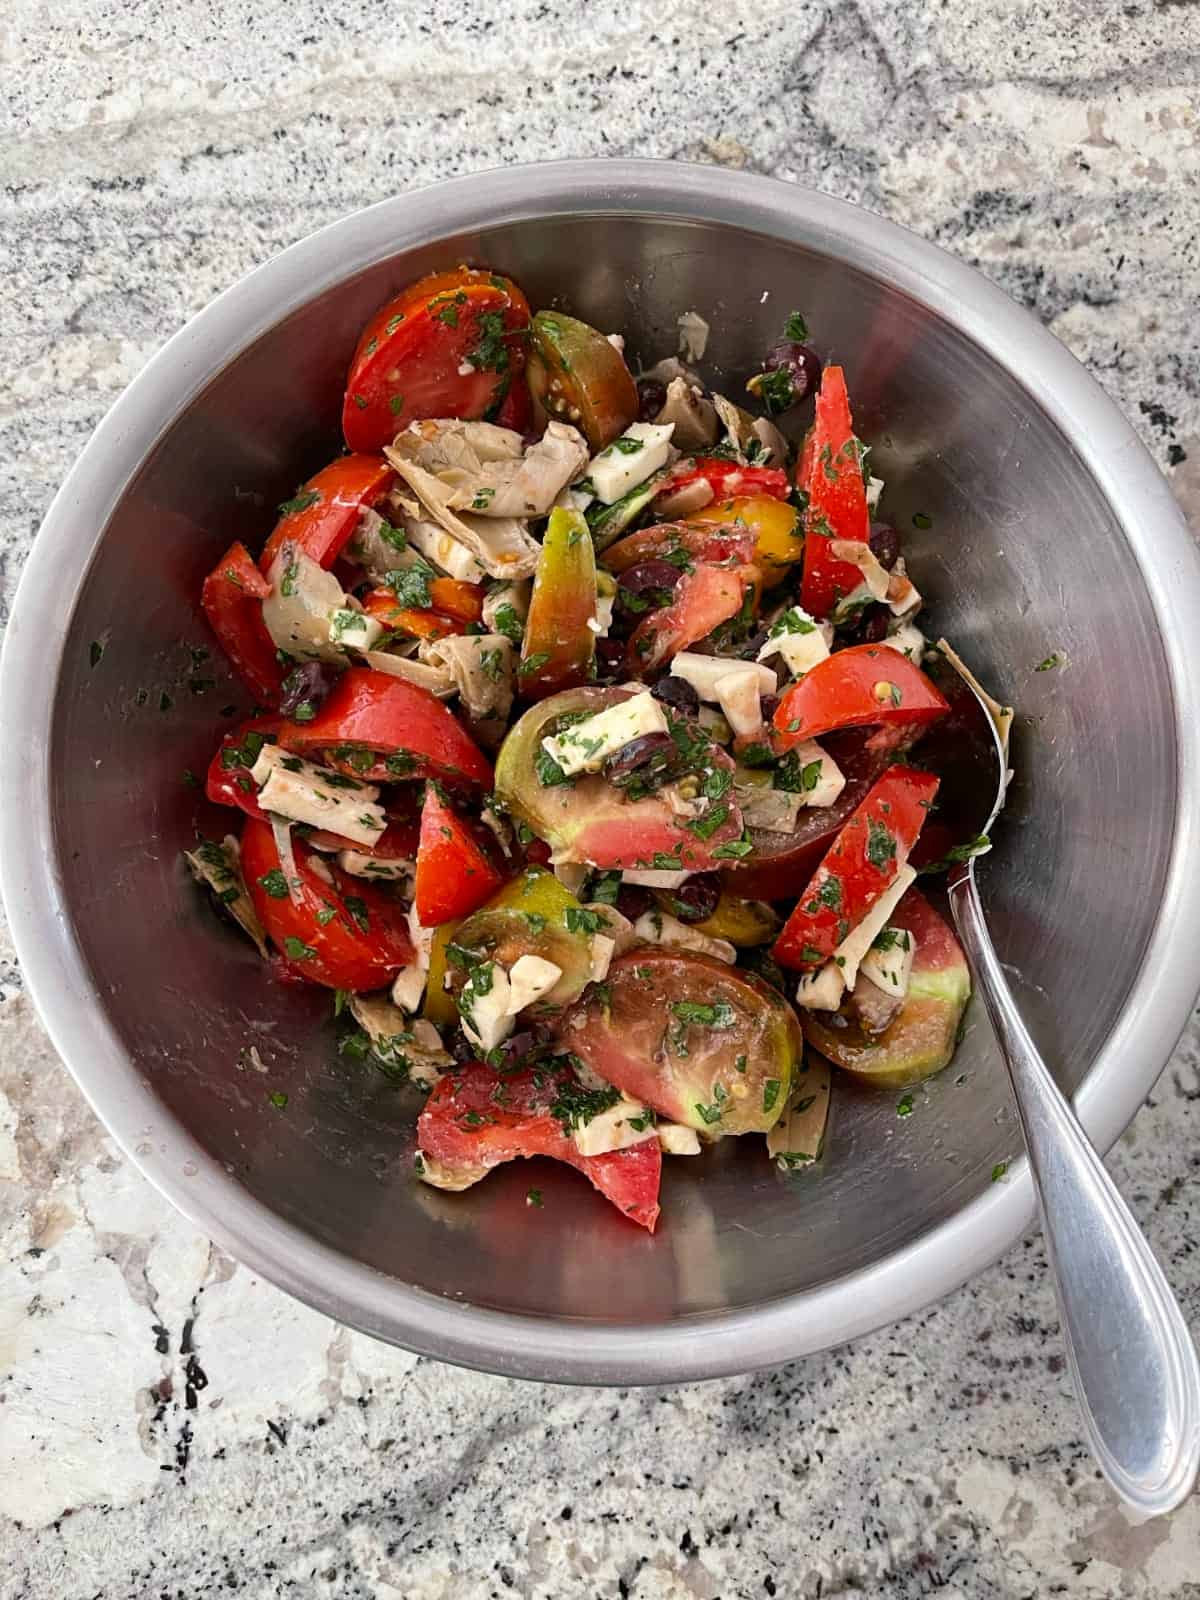 Tossing artichoke tomato salad in mixing bowl.